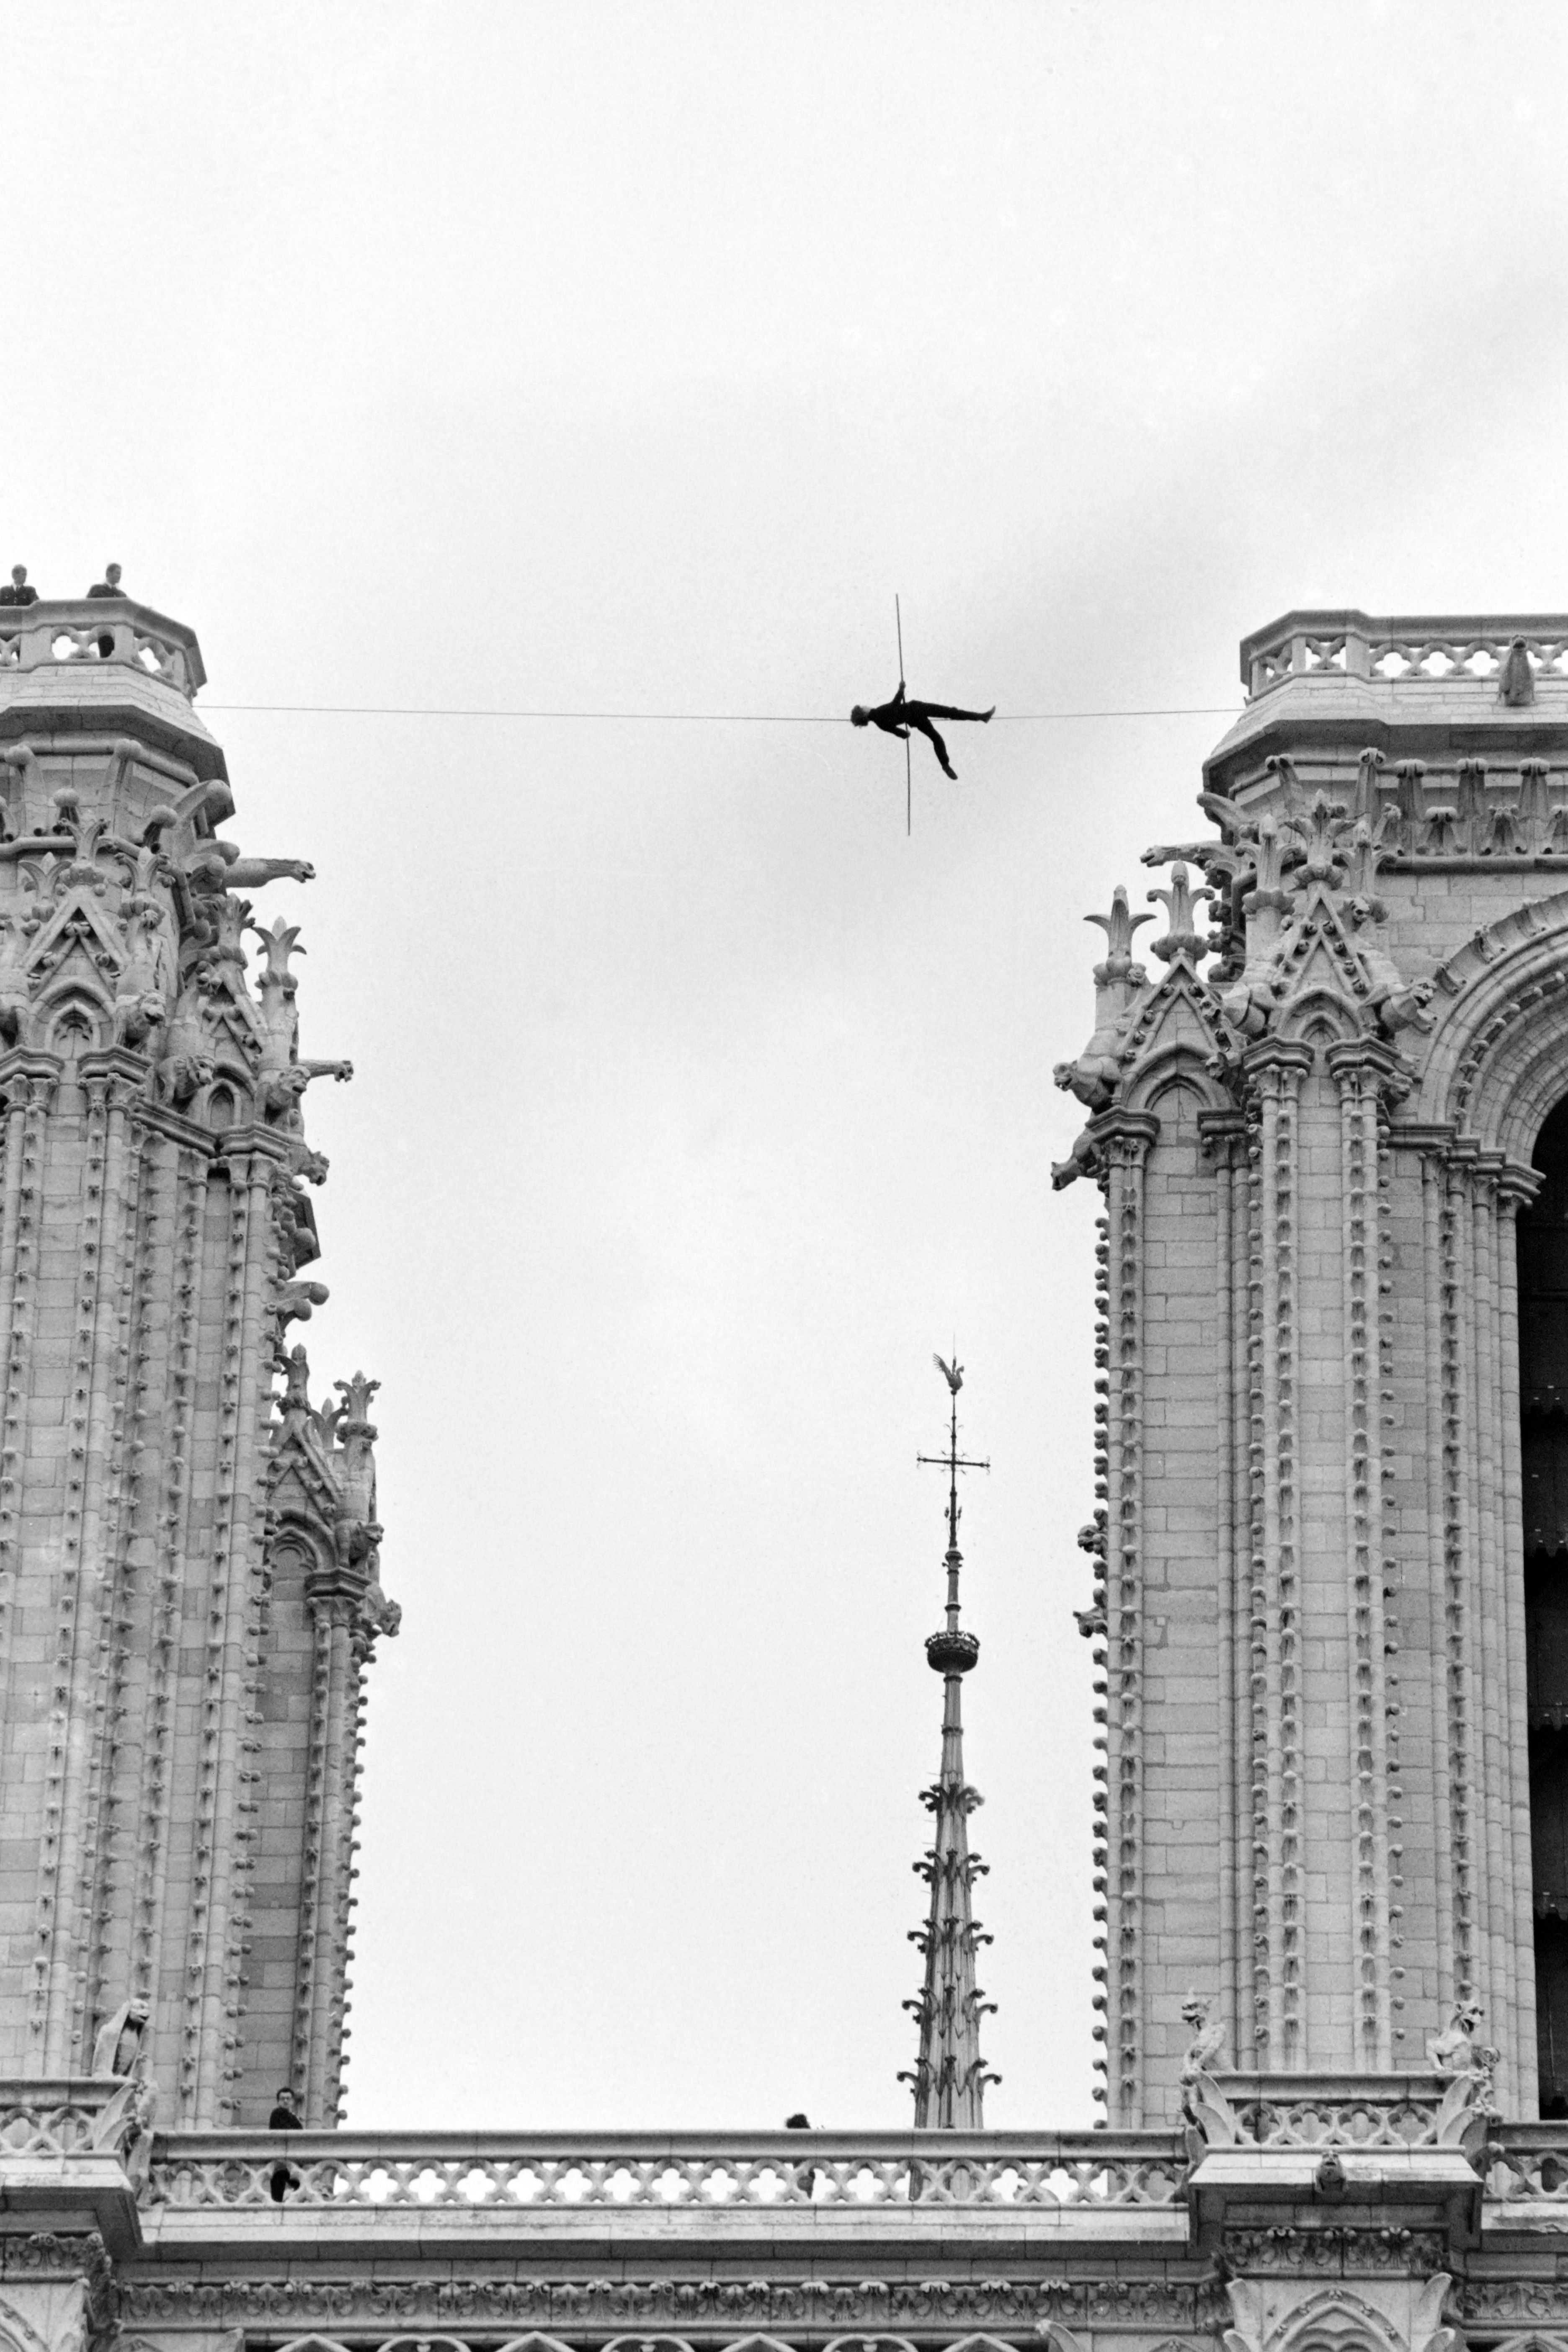 Man on Wire' Philippe Petit still risks it all at 73